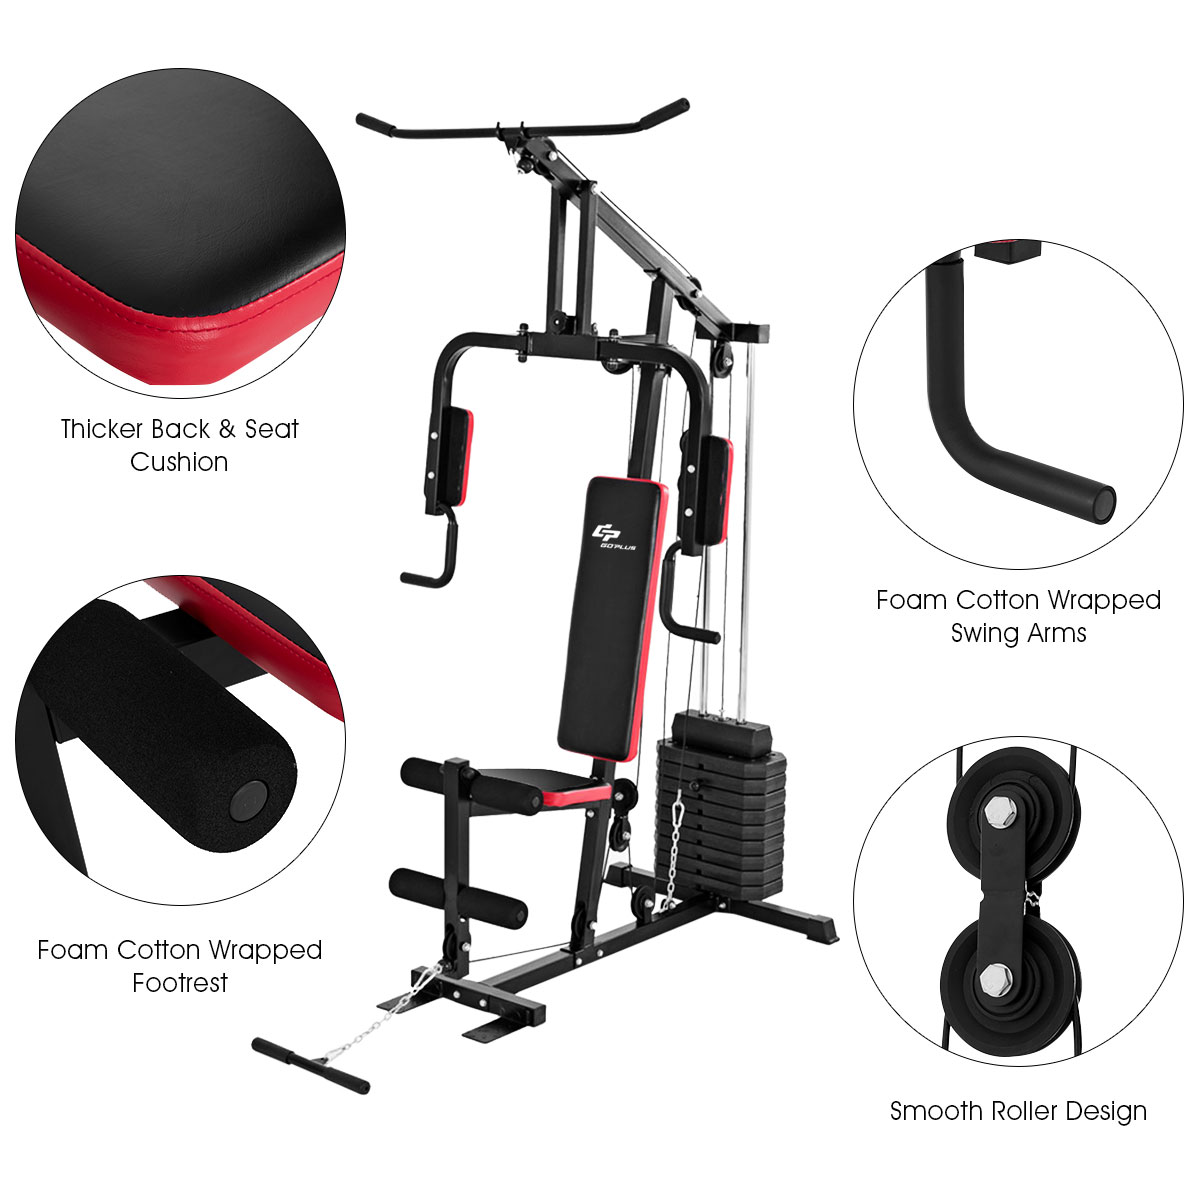 Costway Multifunction Cross Trainer Workout Machine Strength Training Fitness Exercise - image 2 of 9